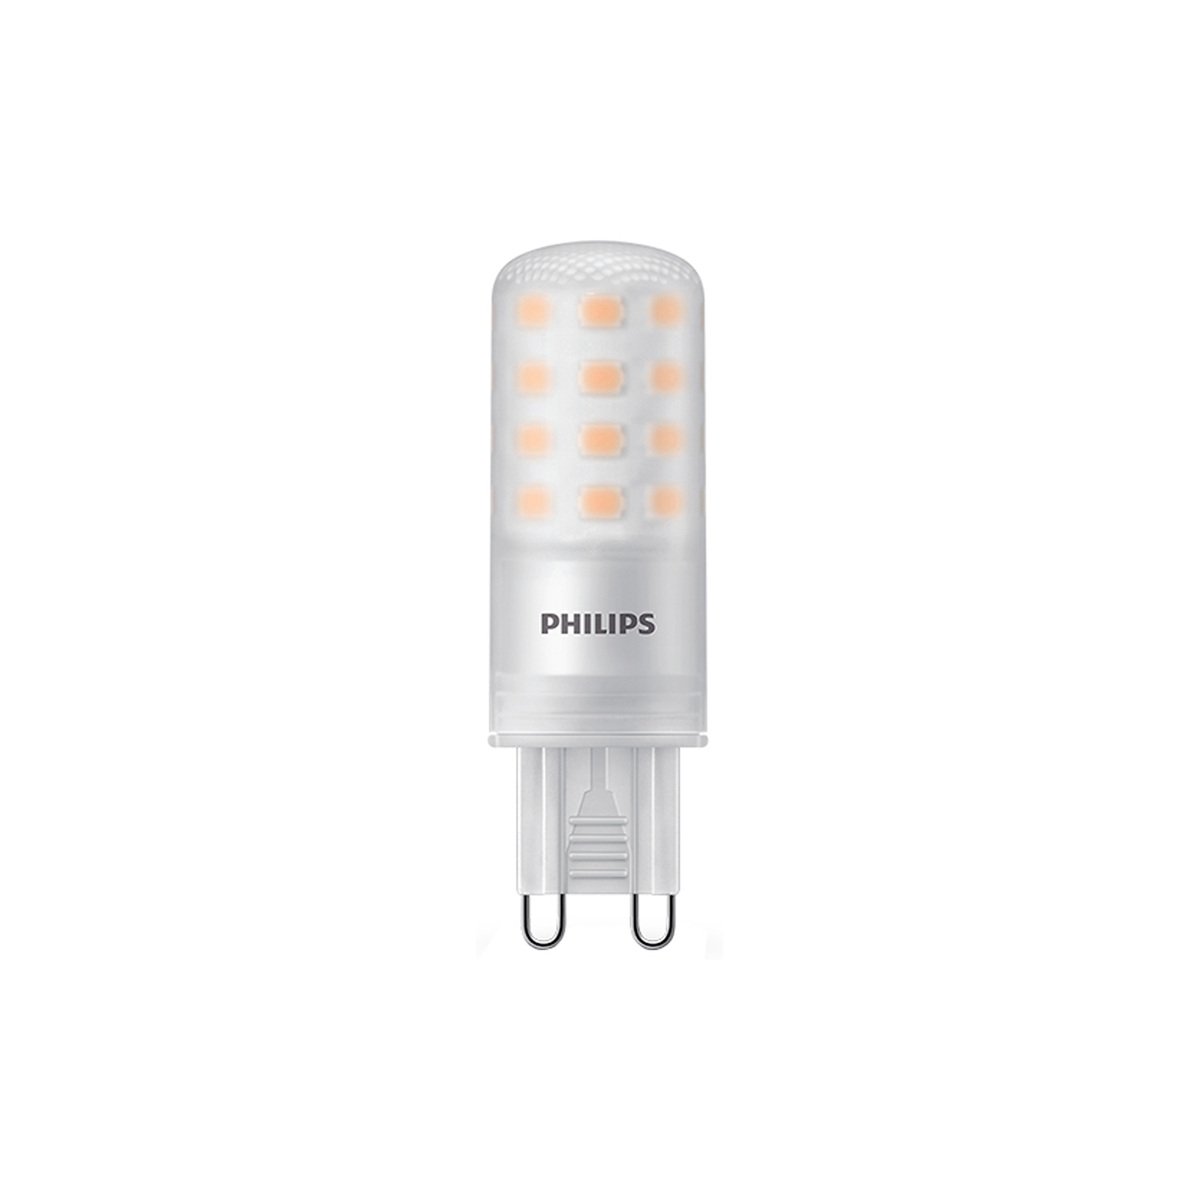 Nuura Philips LED bulb 4W G9 480lm, dimmable